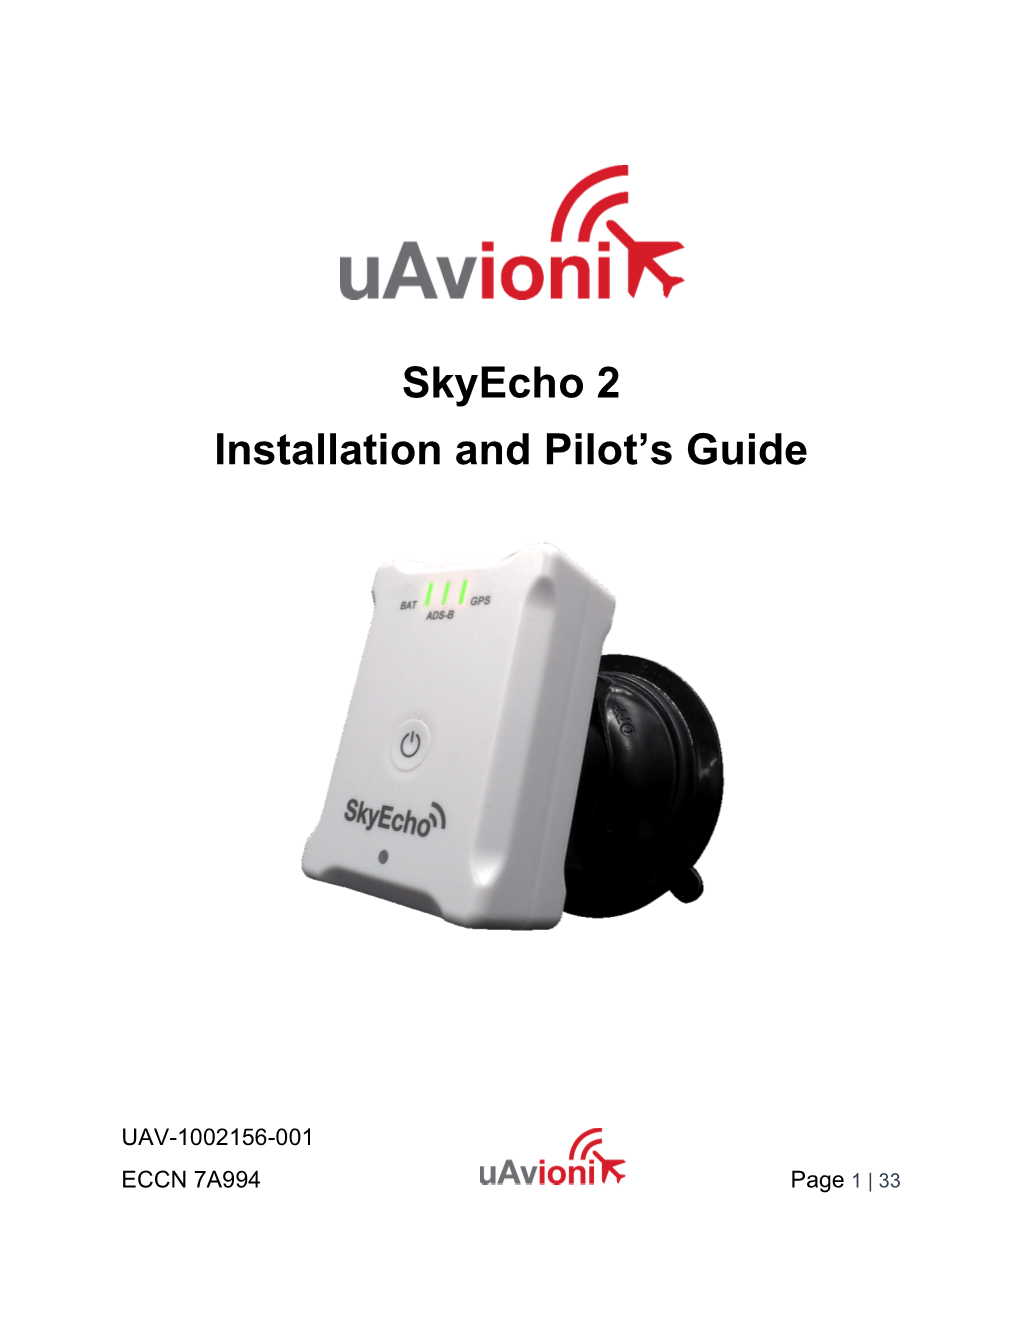 Skyecho 2 User and Installation Guide REV H-AIC